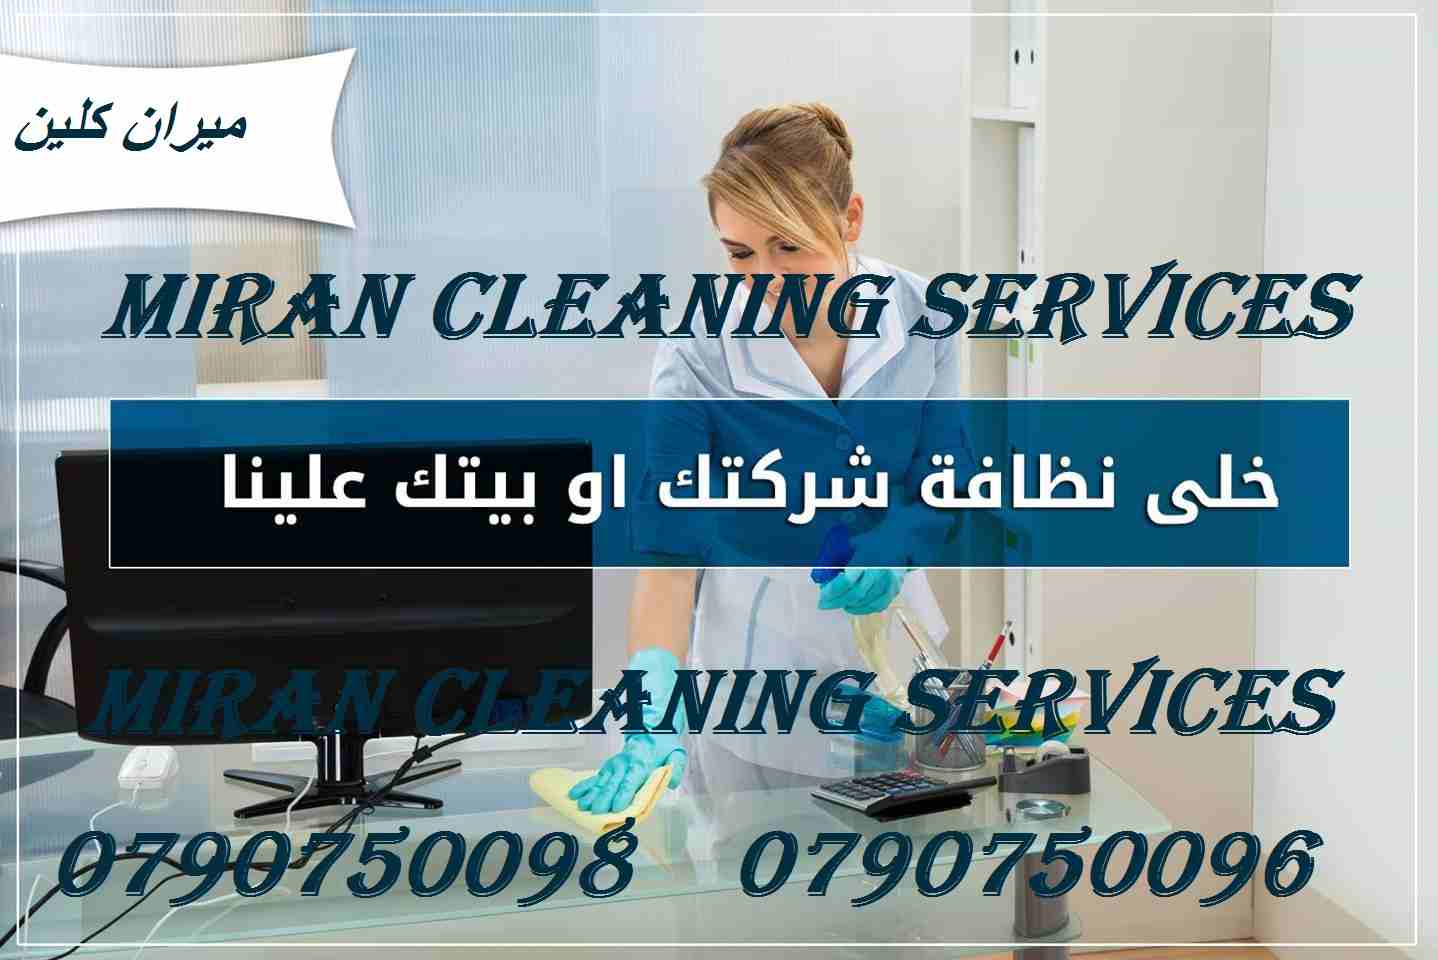 Air Conditioning & General Maintenance at cheap cost. Call / WhatsApp at 055-5269352 / 050-5737068FREE Inspection, Annual Contract, Discounts & Quotatio-  عاملات مياومة لتنظيف و...